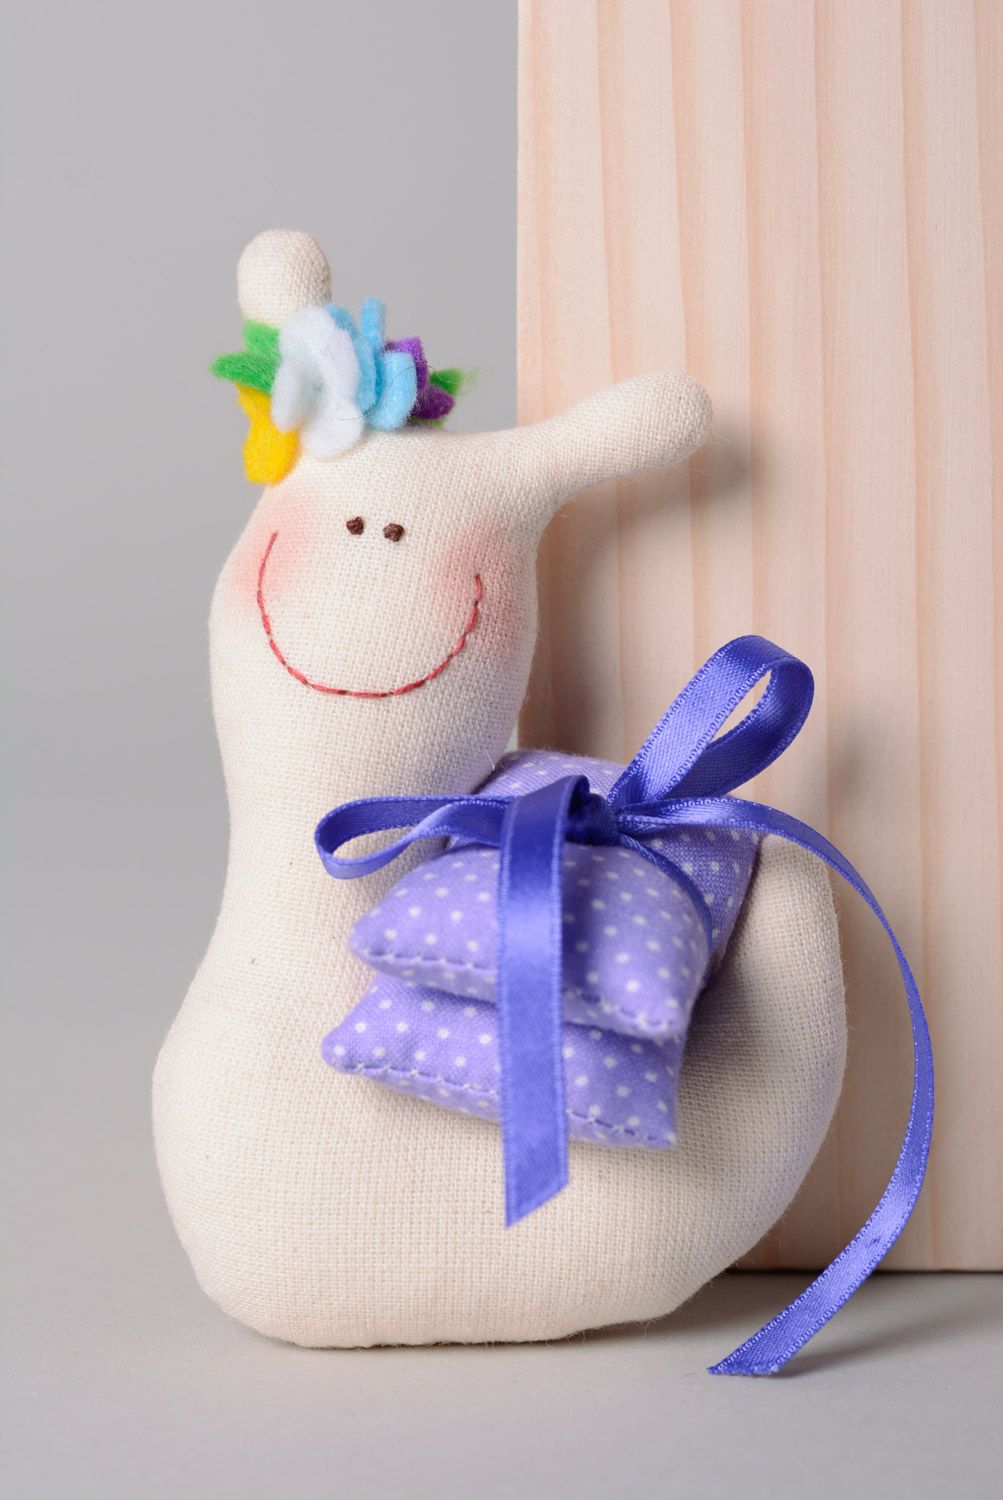 Handmade soft toy sewn of linen and cotton in the shape of snail with pillows photo 1